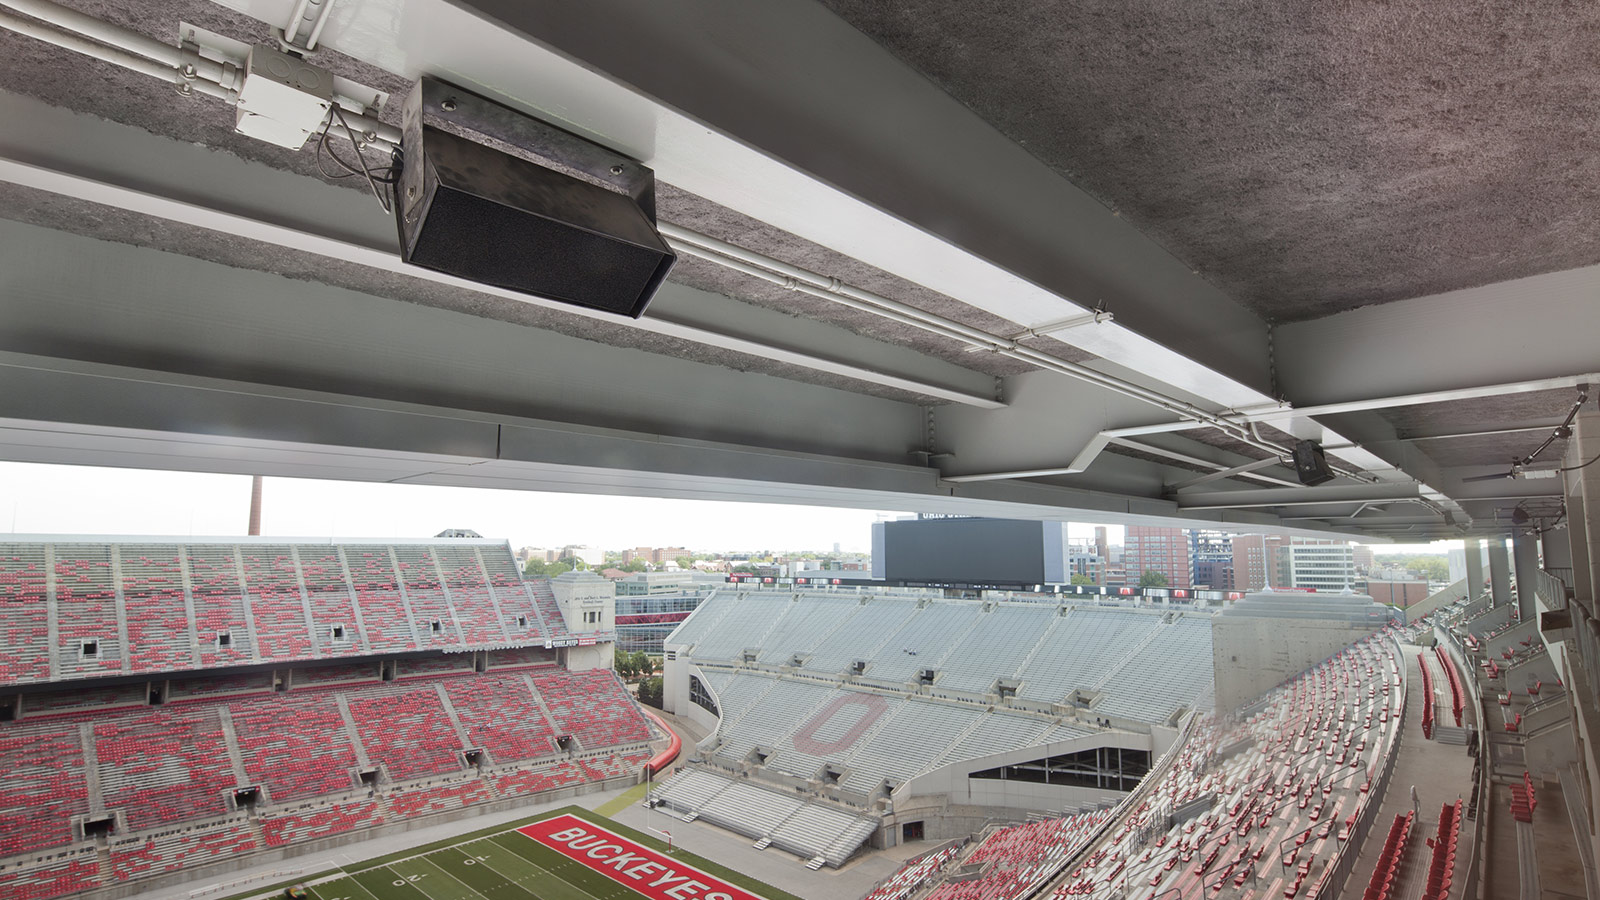 Ohio State University Finishes Undefeated Season with World's First Installation of Meyer Sound LEO